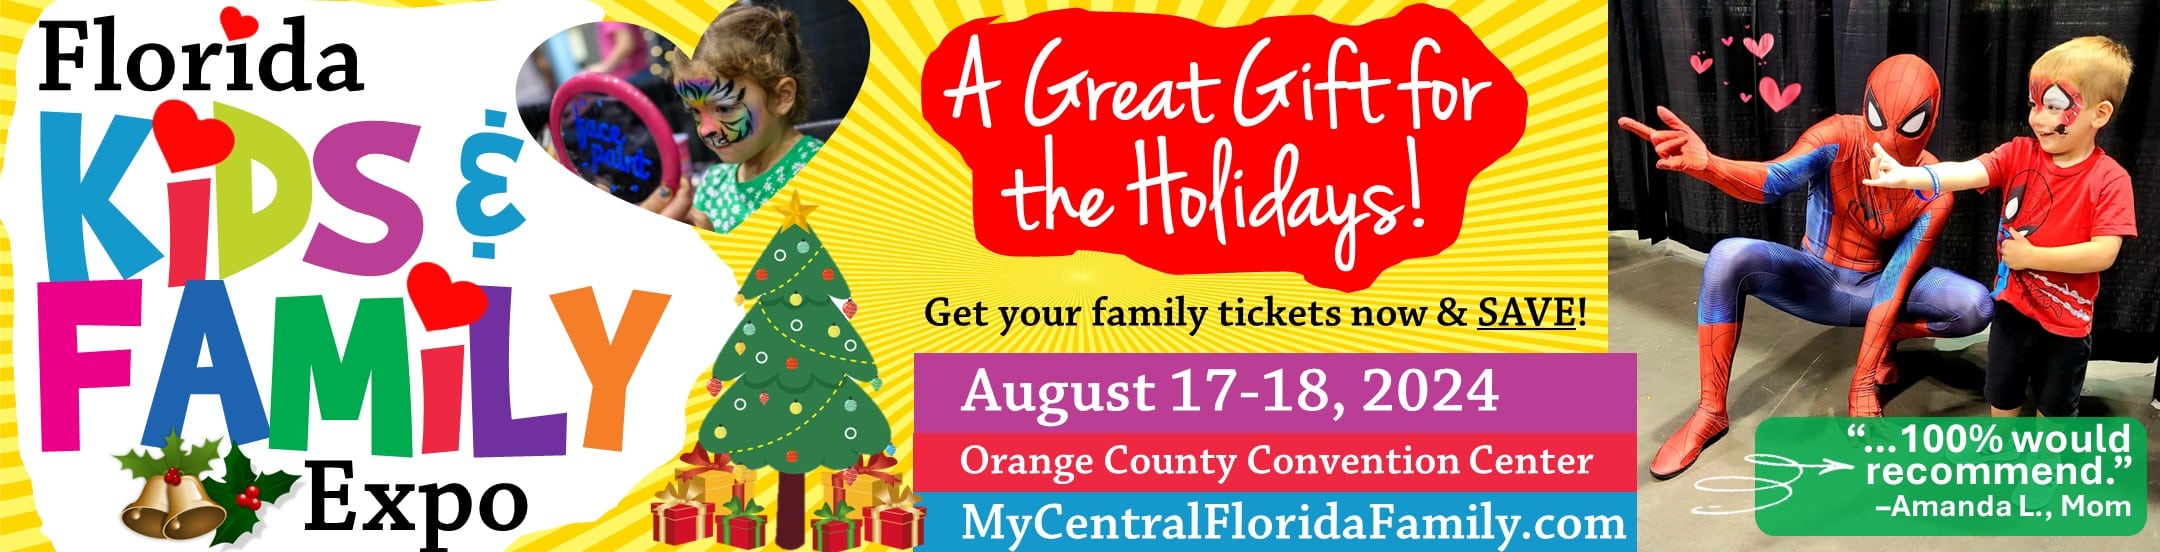 Florida Kids and Family Expo Holiday Online